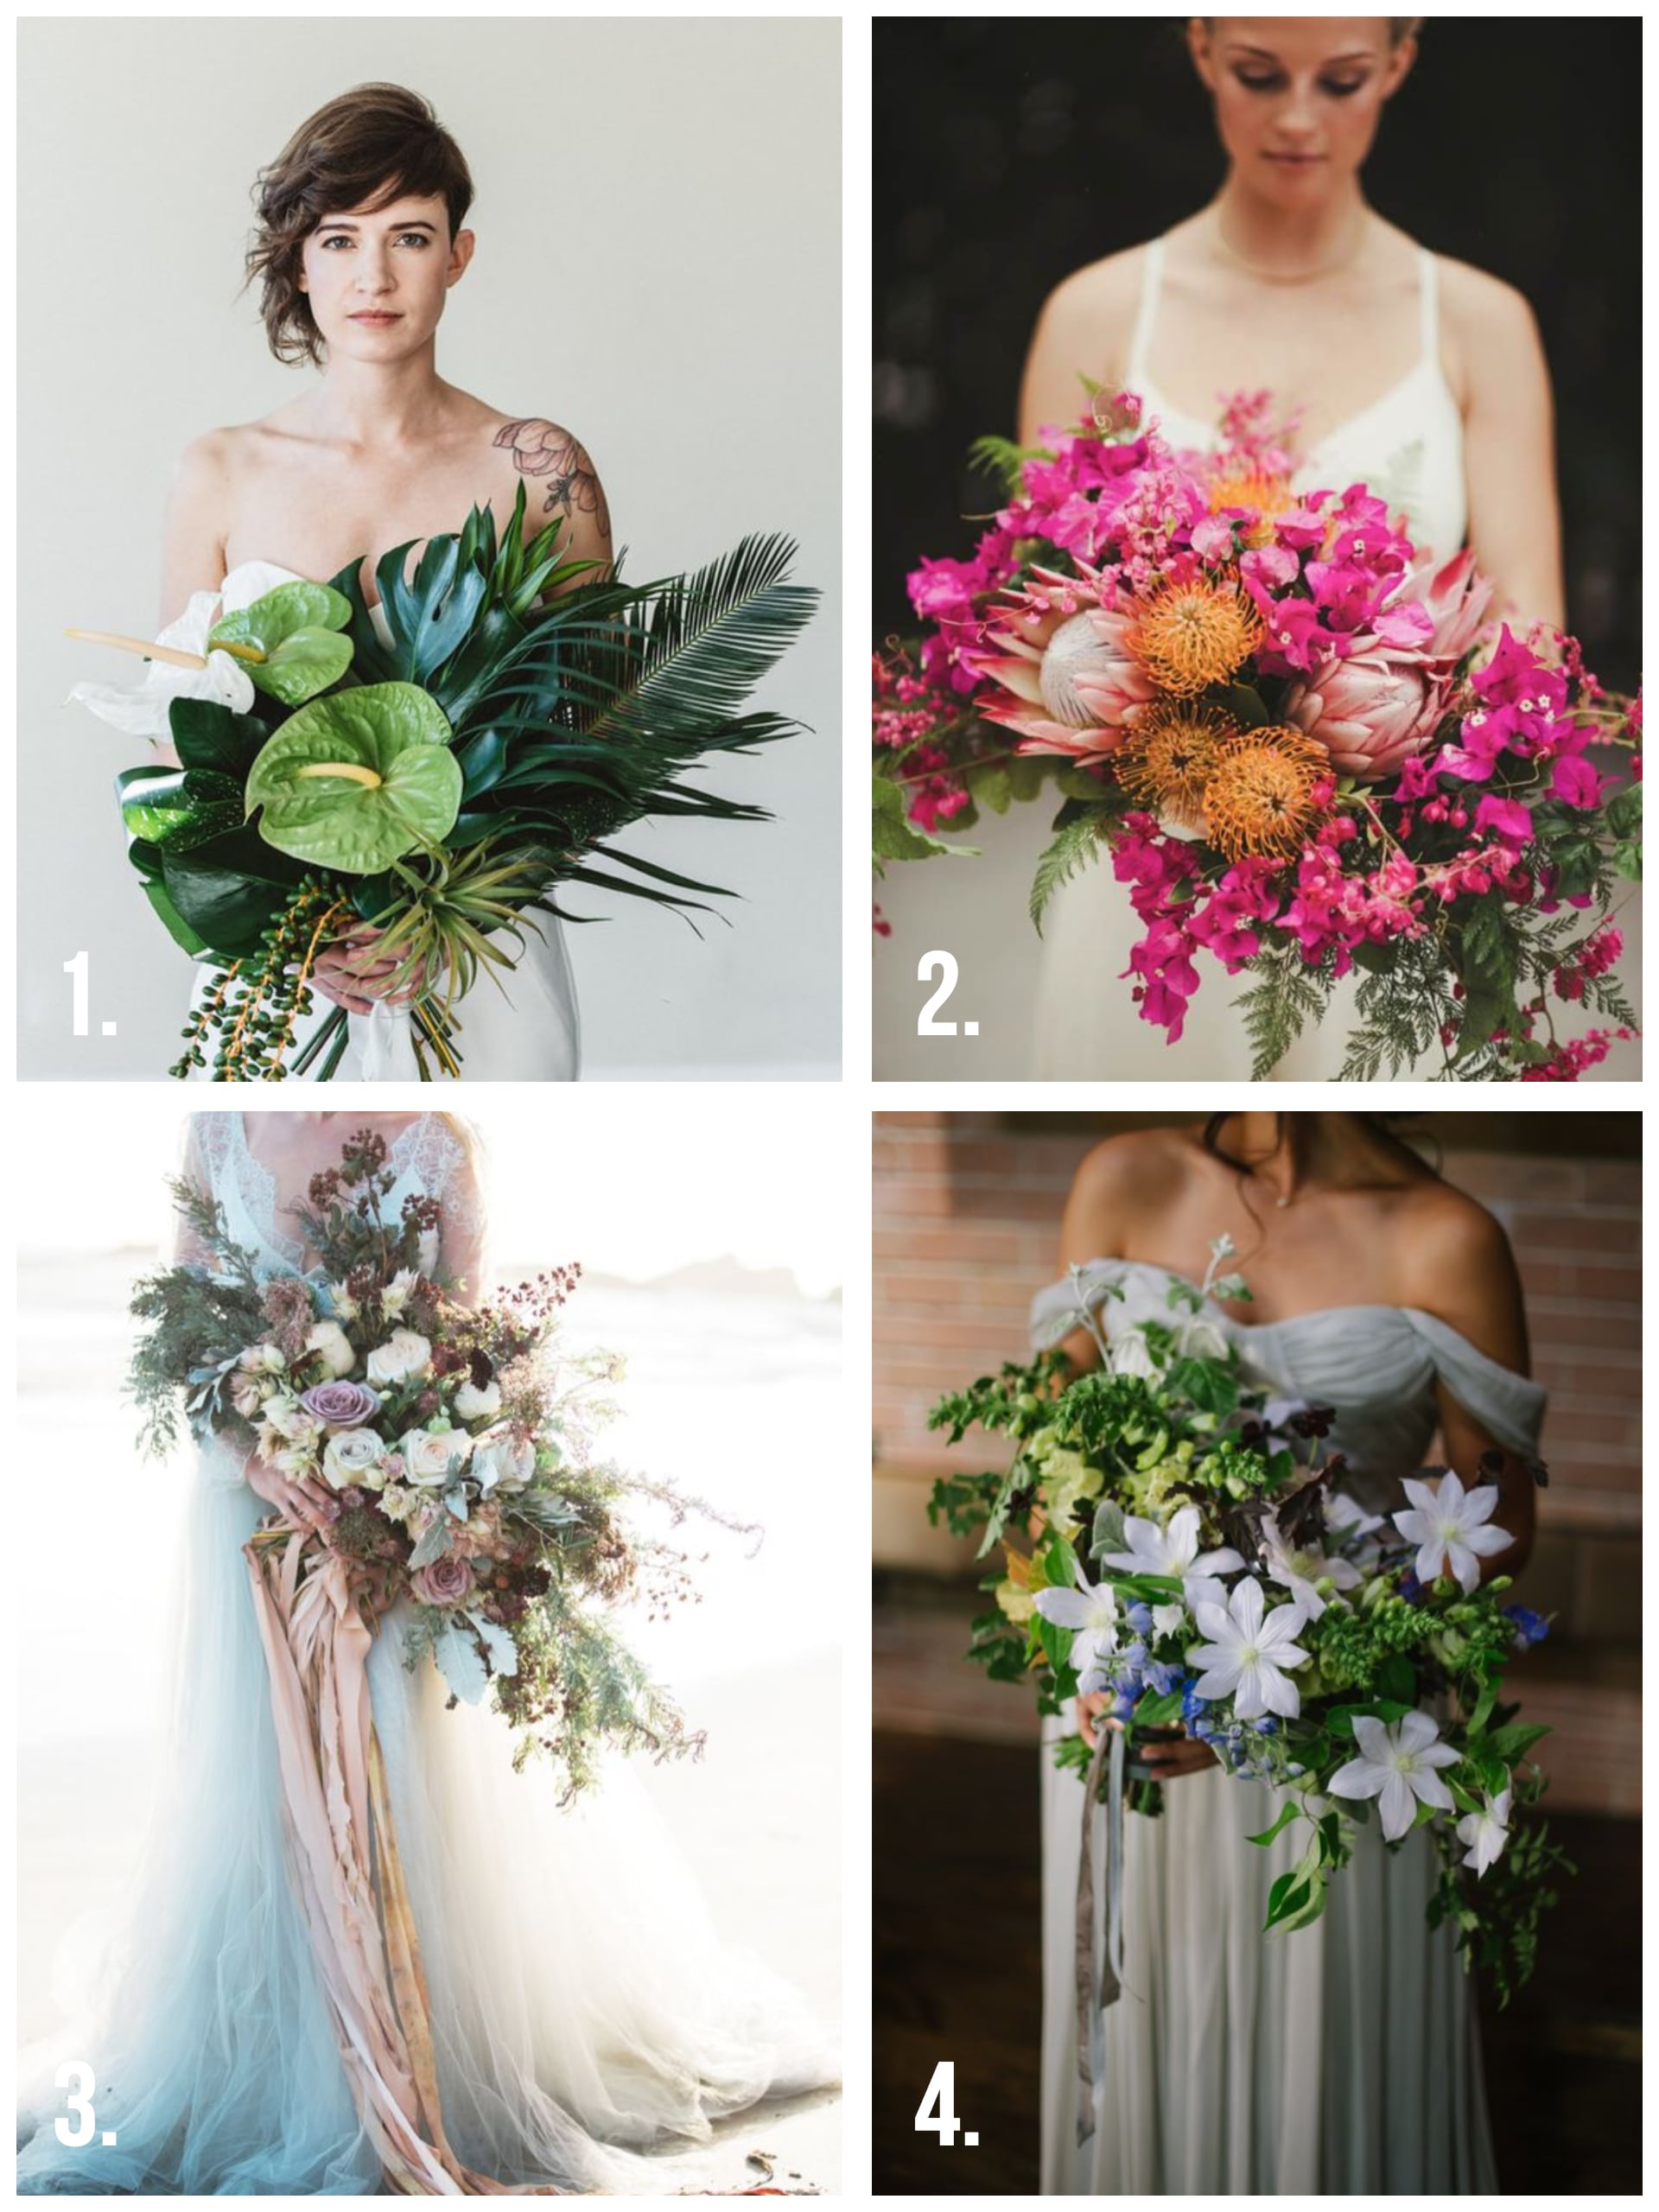 Four panel image of asymmetrical bouquets